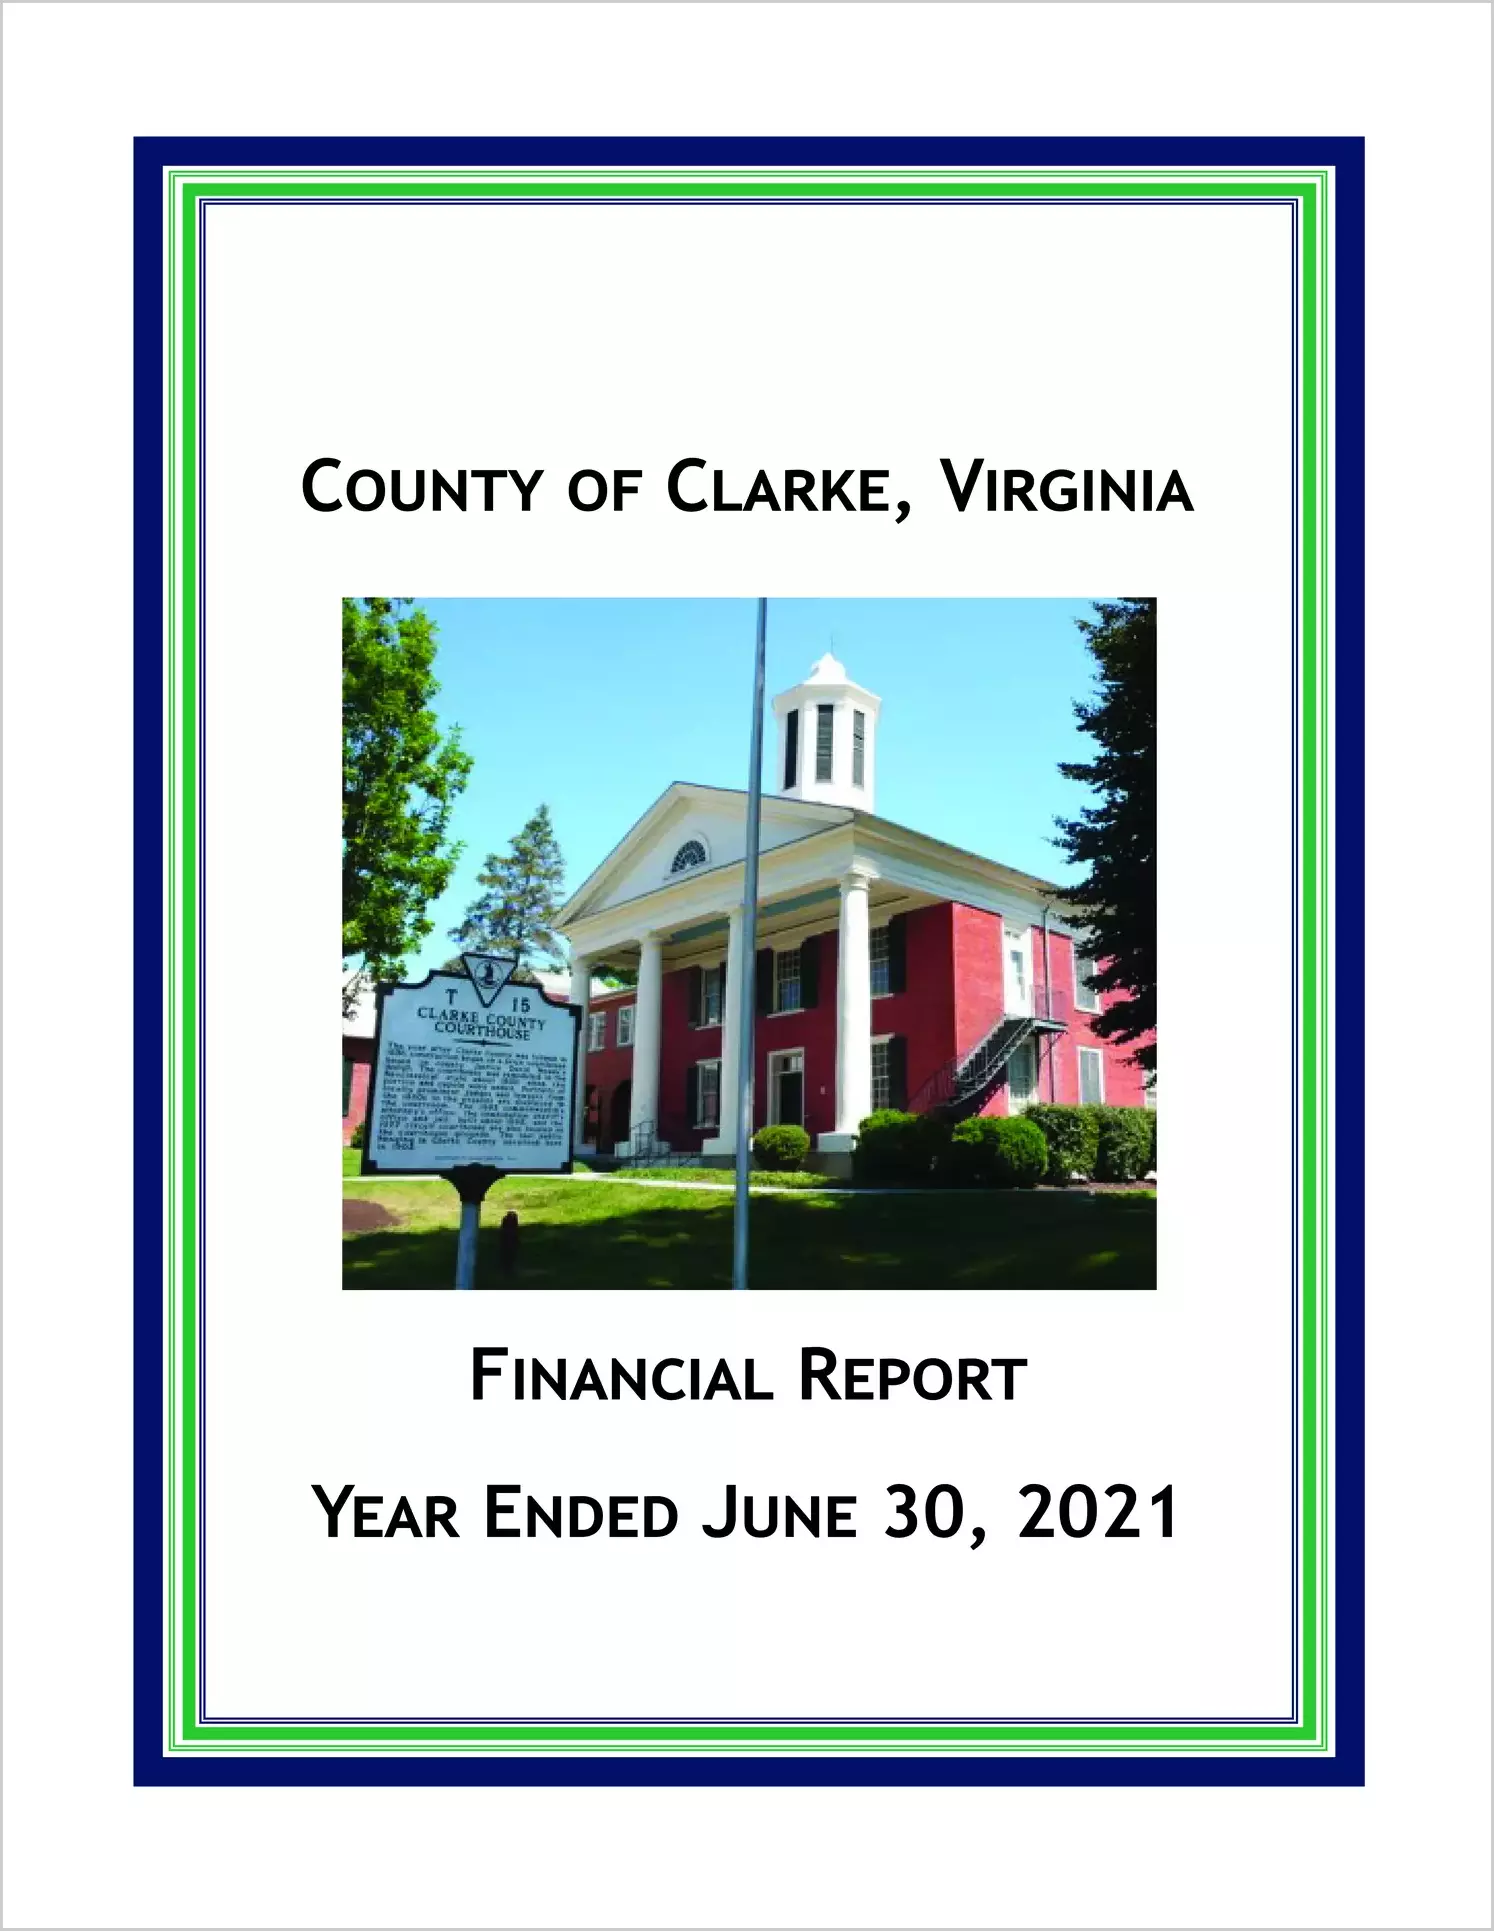 2021 Annual Financial Report for County of Clarke